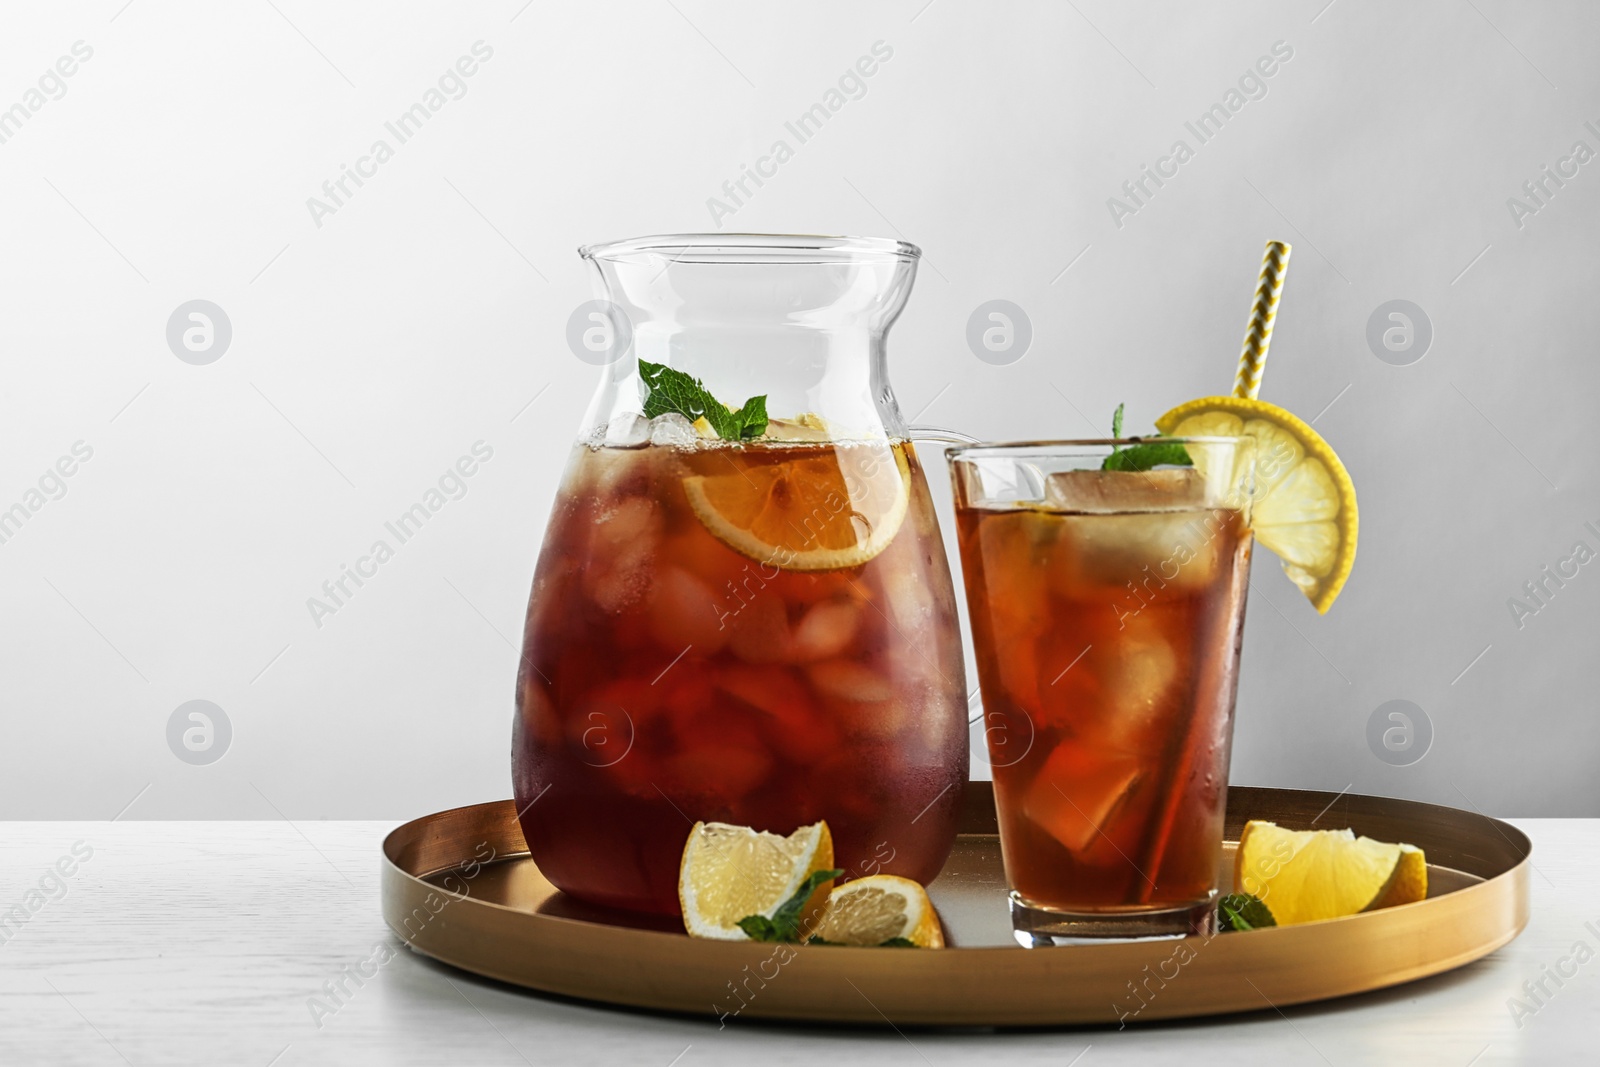 Photo of Jug and glass of delicious iced tea on table against light background